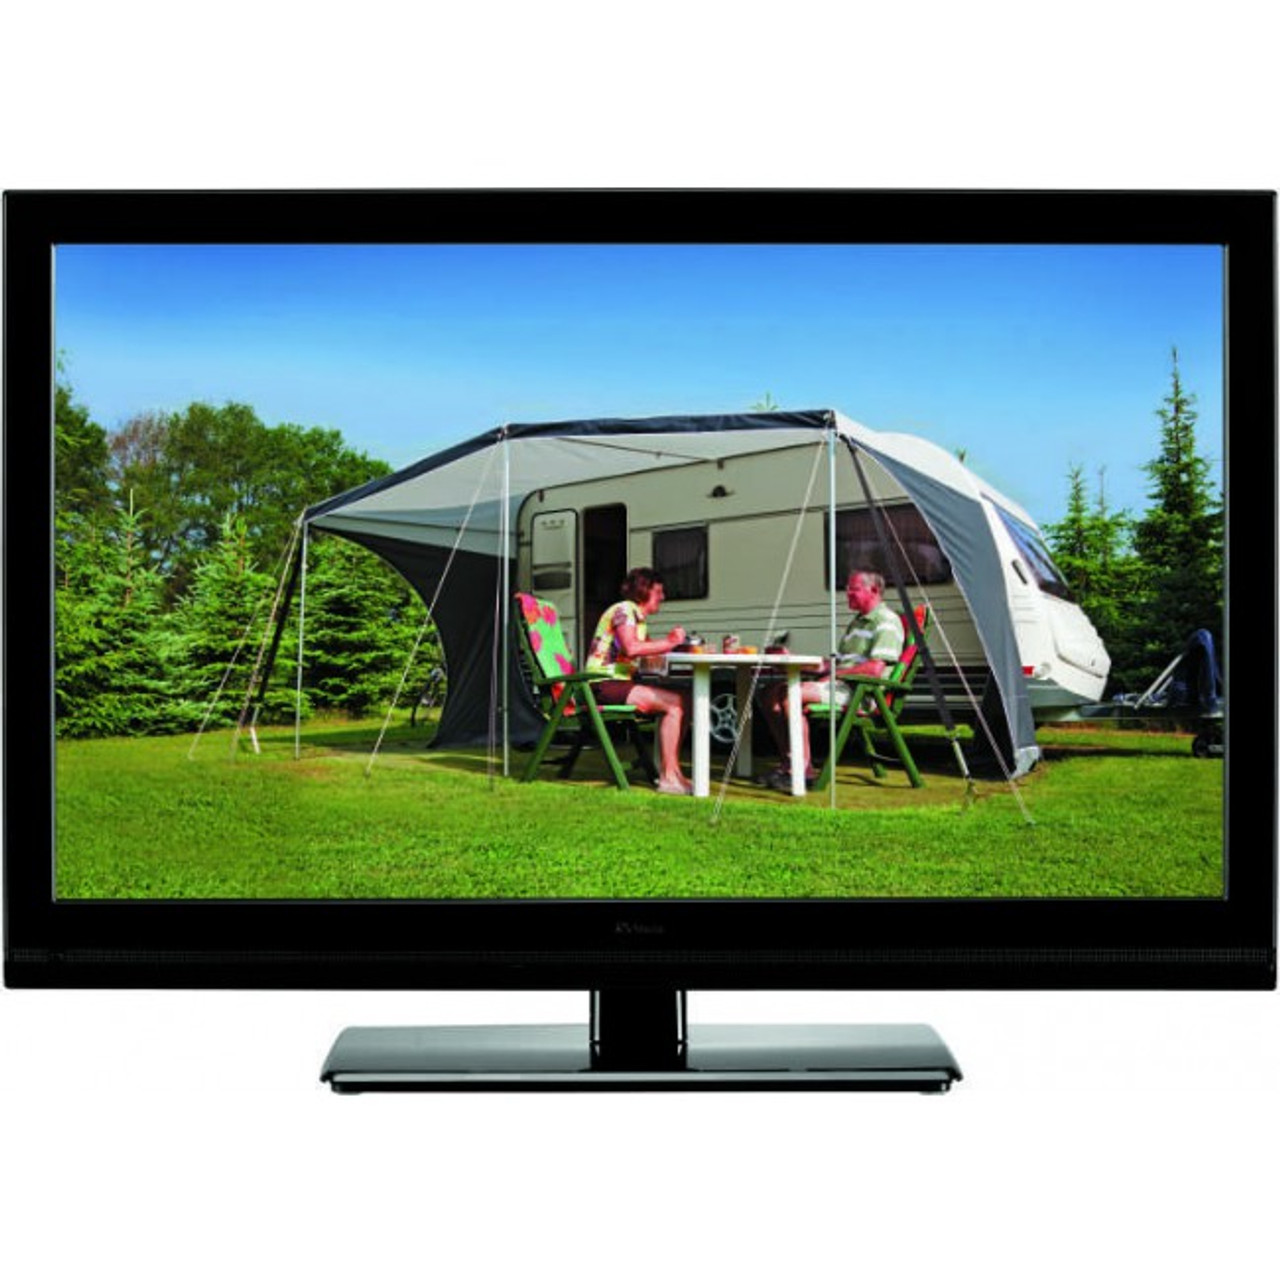 RV Media 12 TV 19 inch - Front view